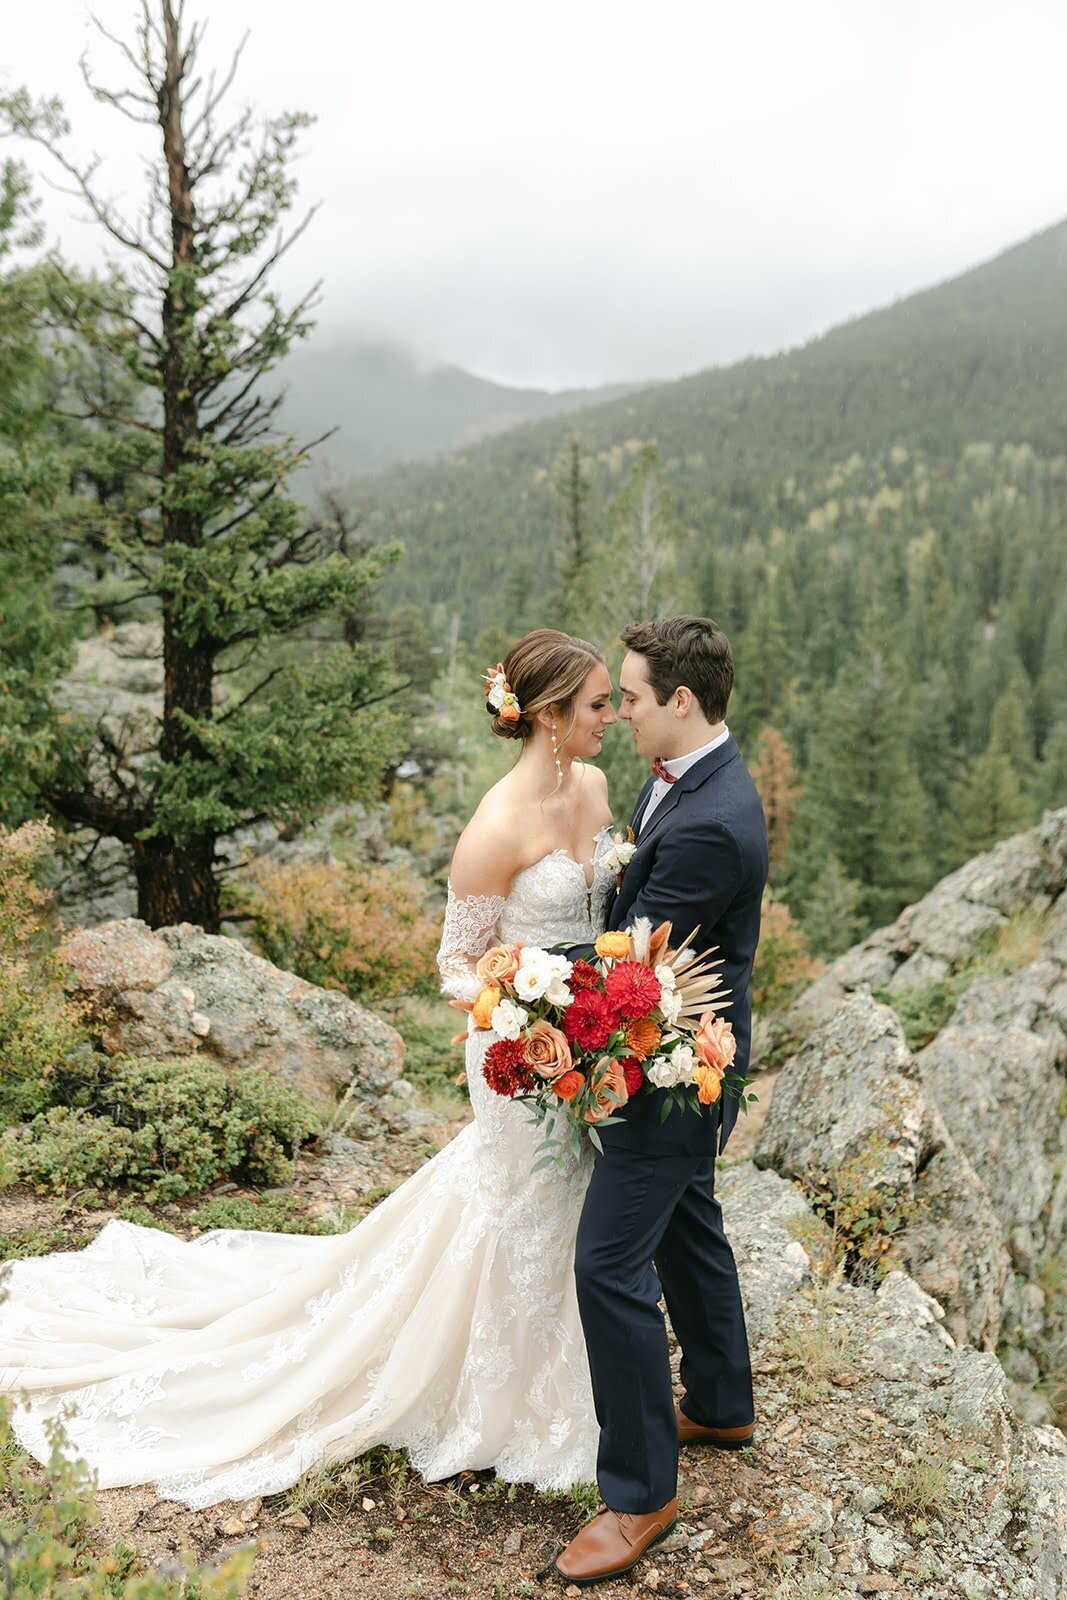 Bride and Groom in the mountains on their wedding day at North Star Gatherings.